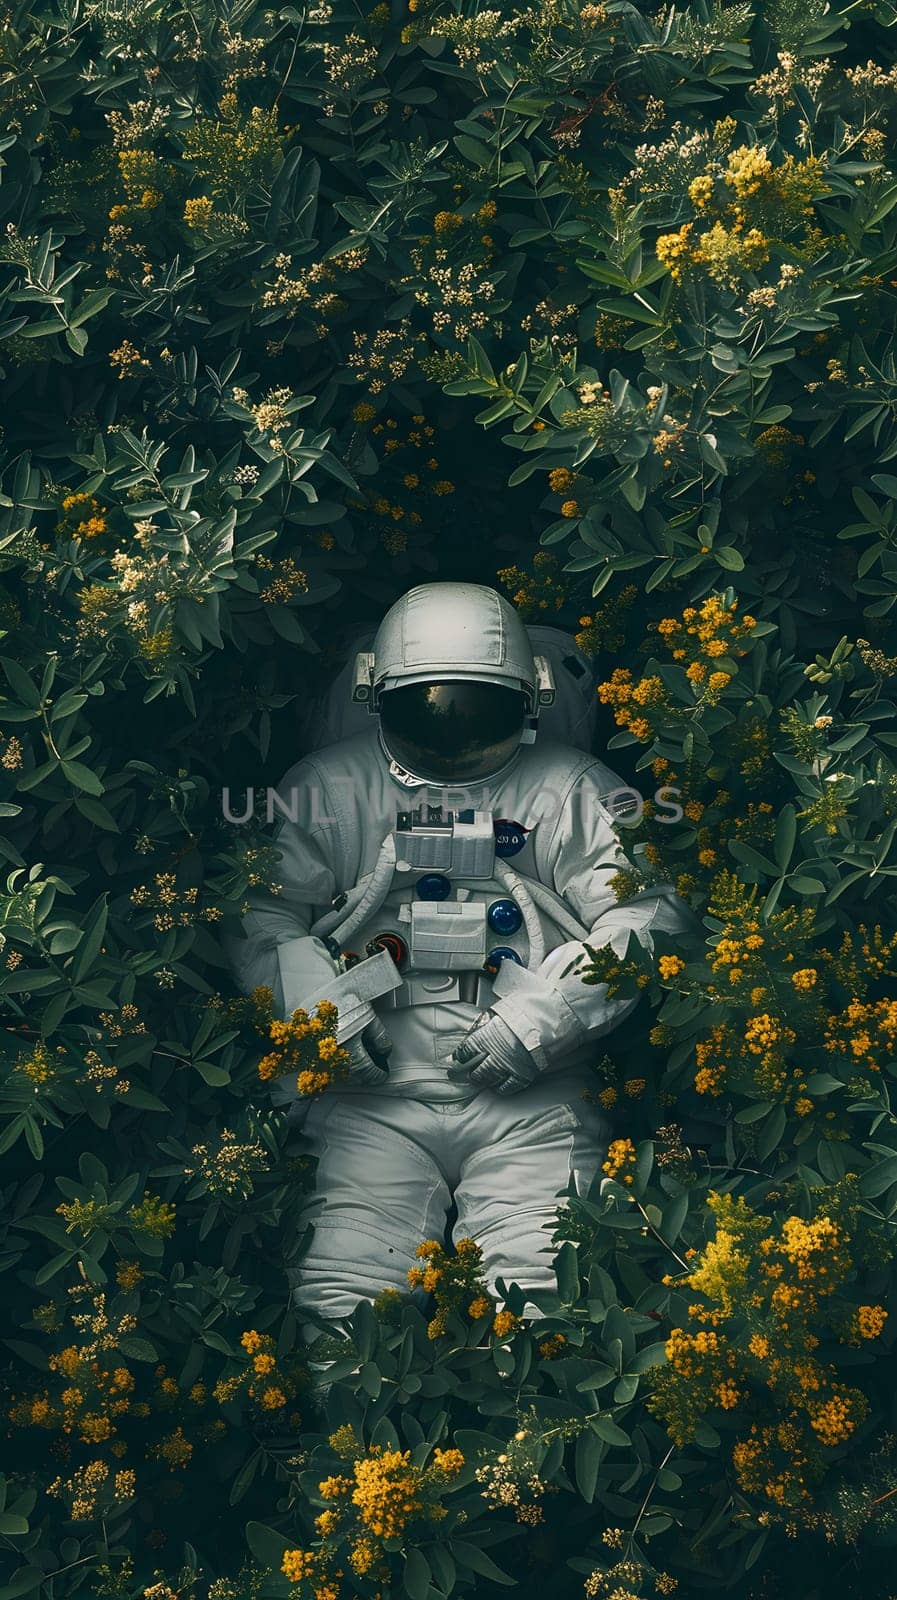 A fictional character astronaut is resting in a yellow flower bush, wearing personal protective equipment and gazing at the forest landscape